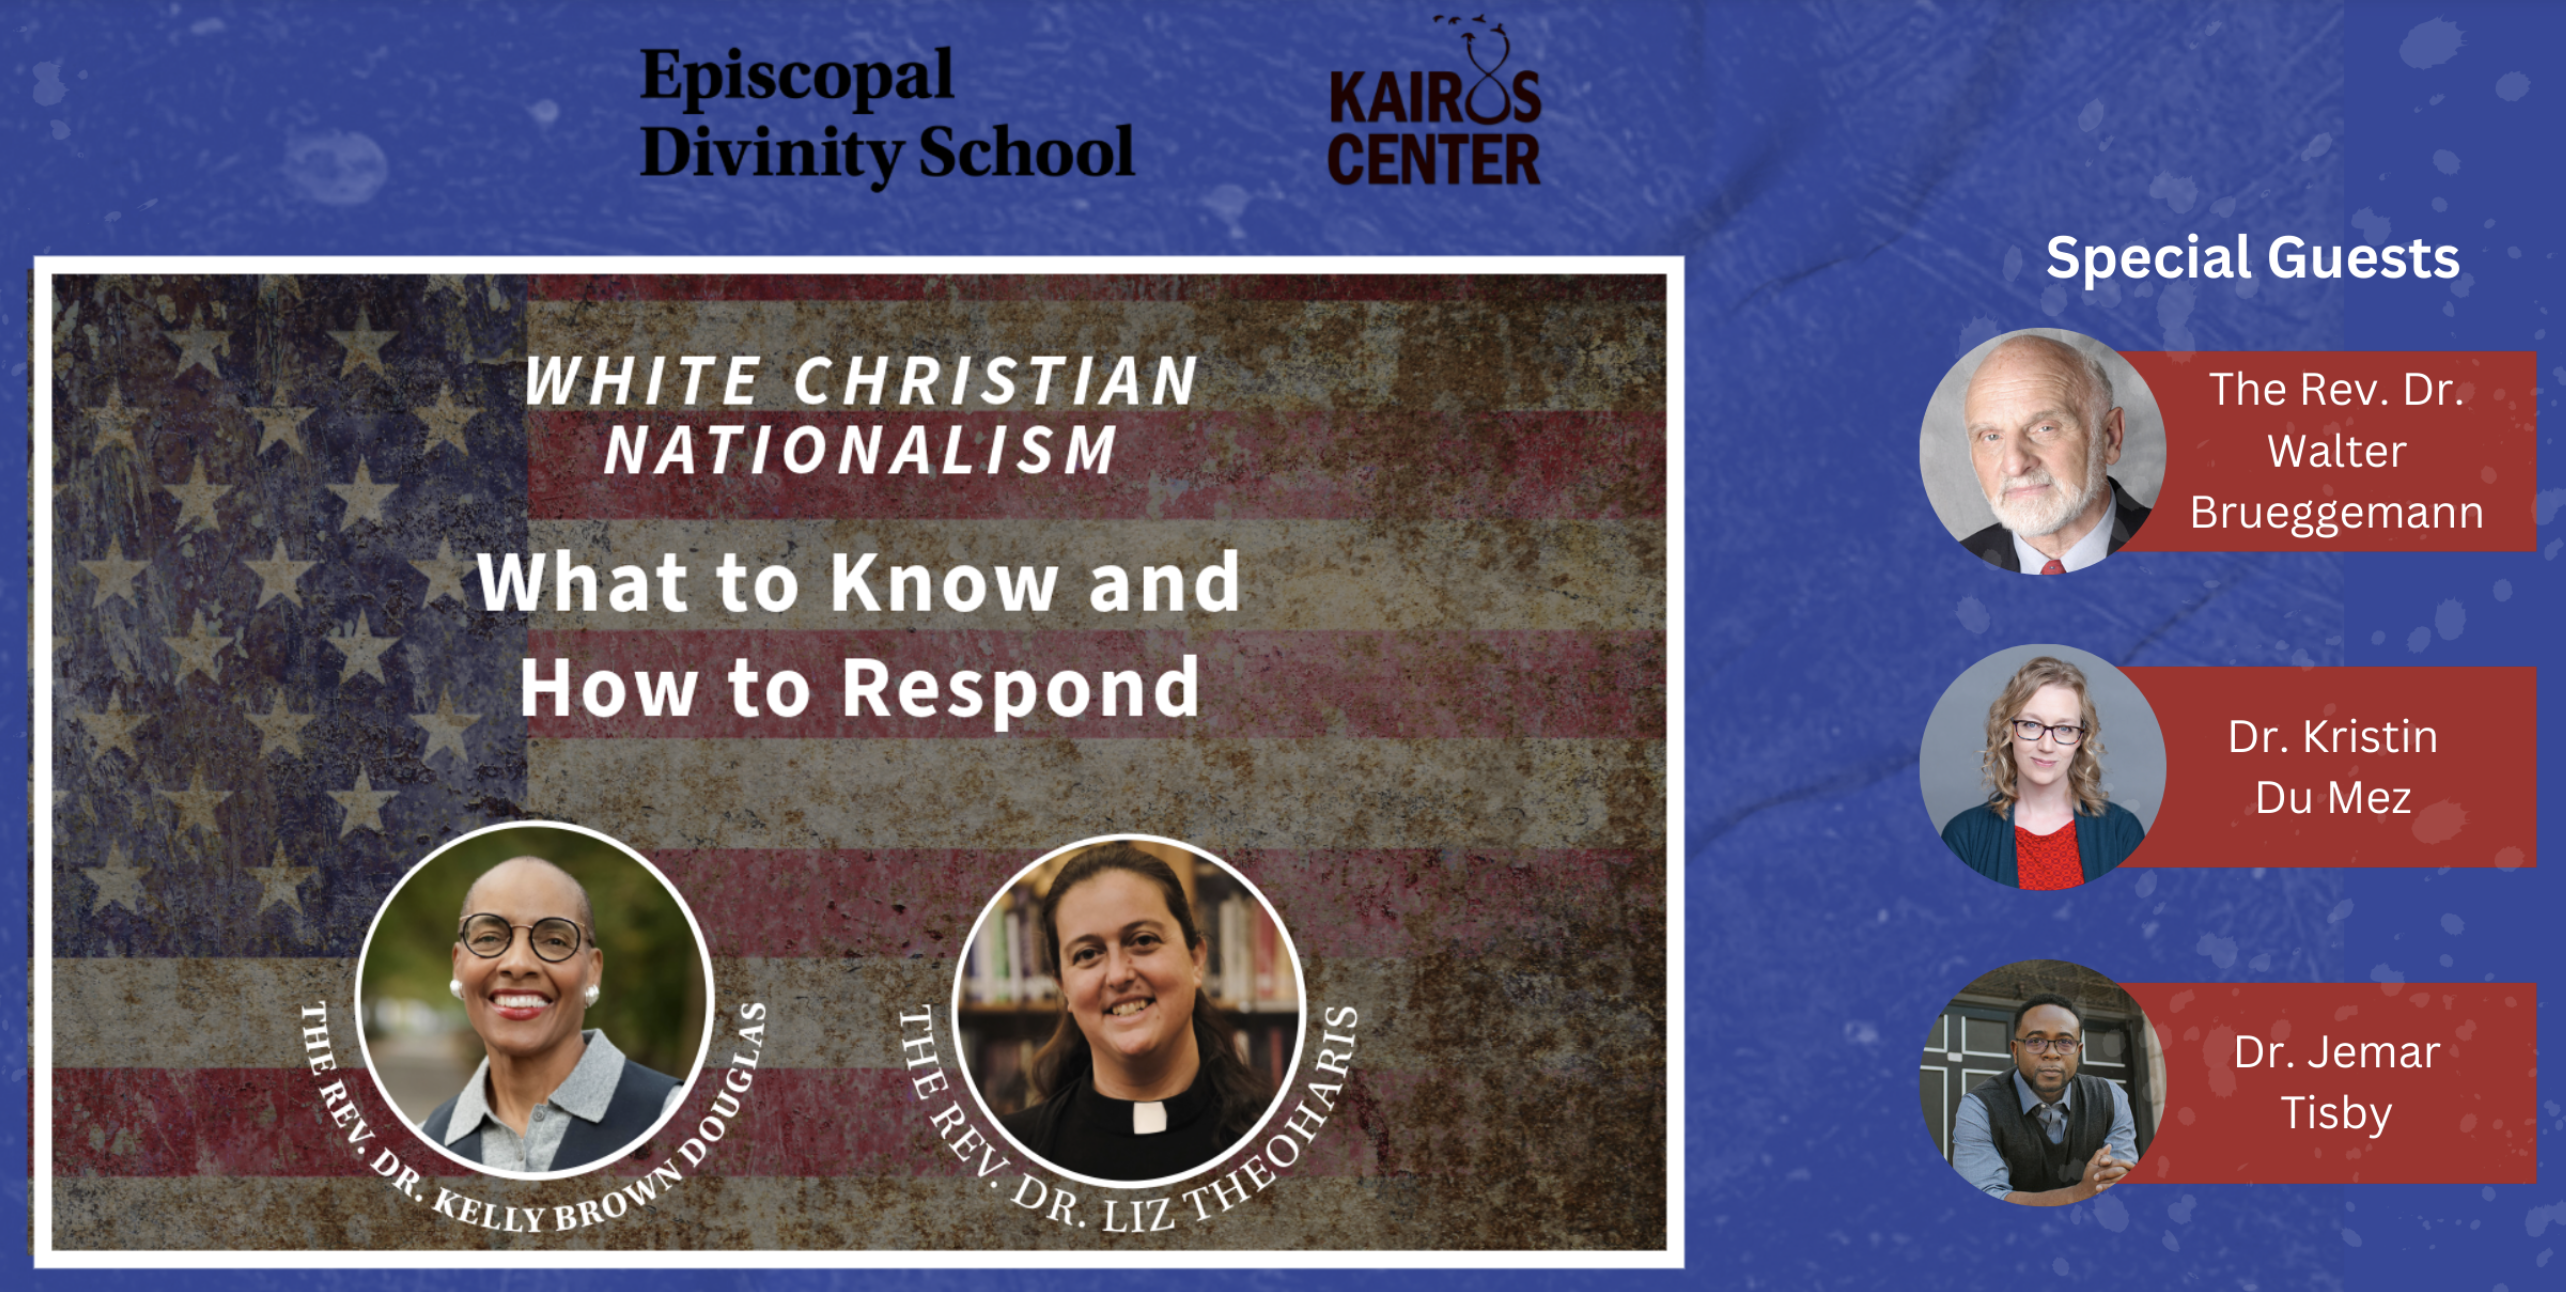 White Christian Nationalism: What to Know and How to Respond